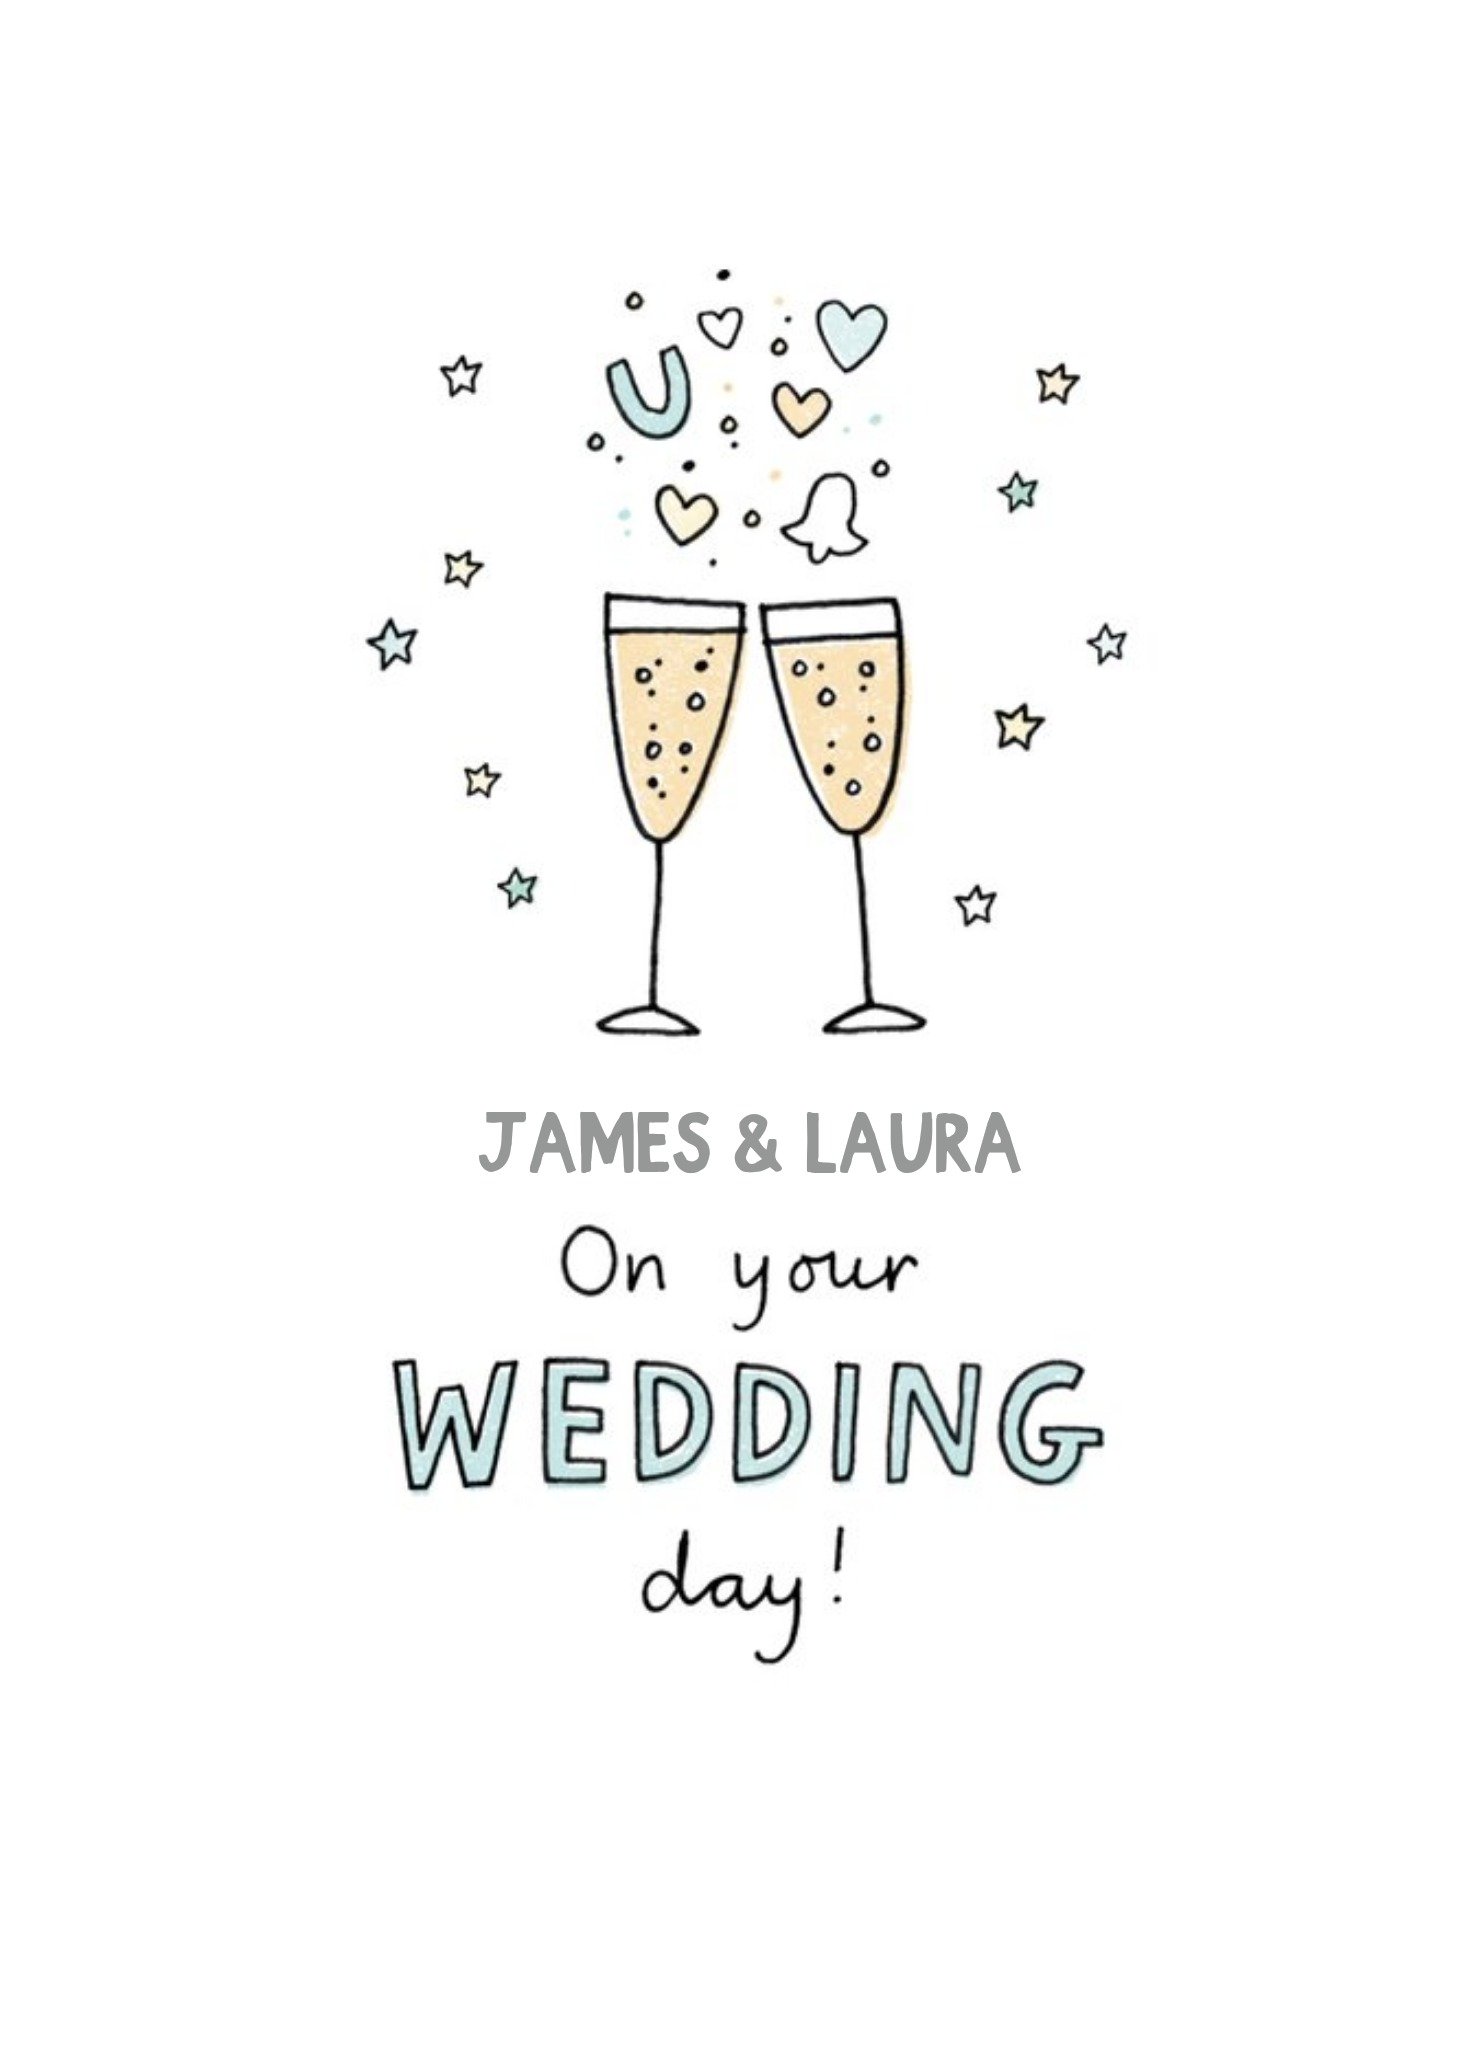 Moonpig Illustrated Champagne Glasses With Confetti. On Your Wedding Day Card Ecard